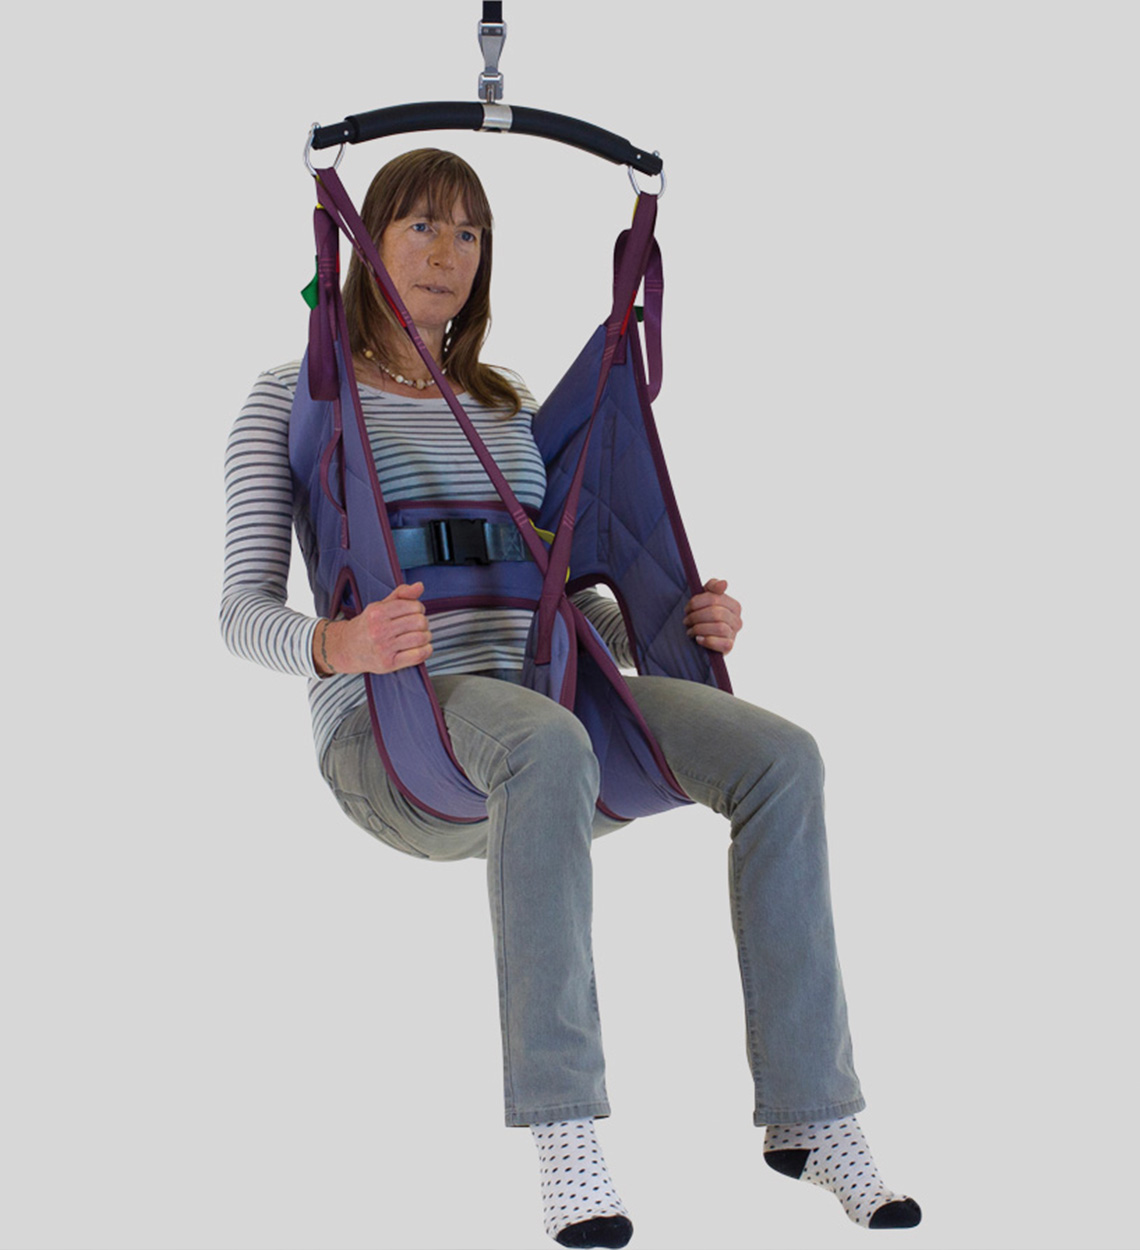 Person seated in a hygienic sling with back and leg support